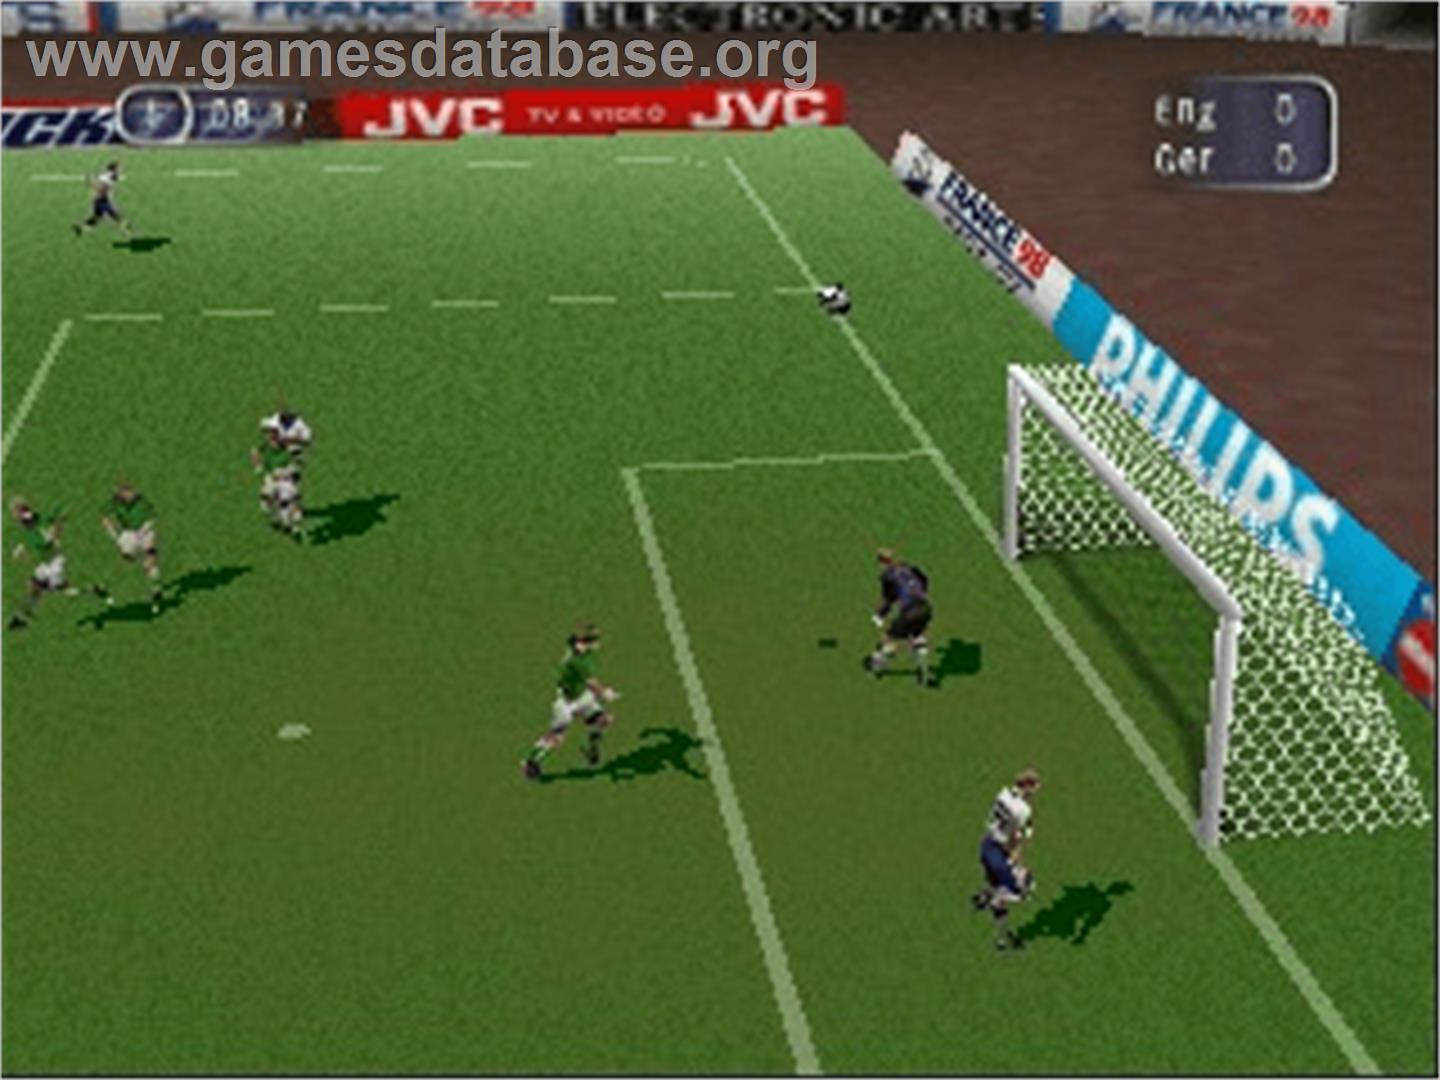 FIFA 98: Road to World Cup - Nintendo N64 - Artwork - In Game